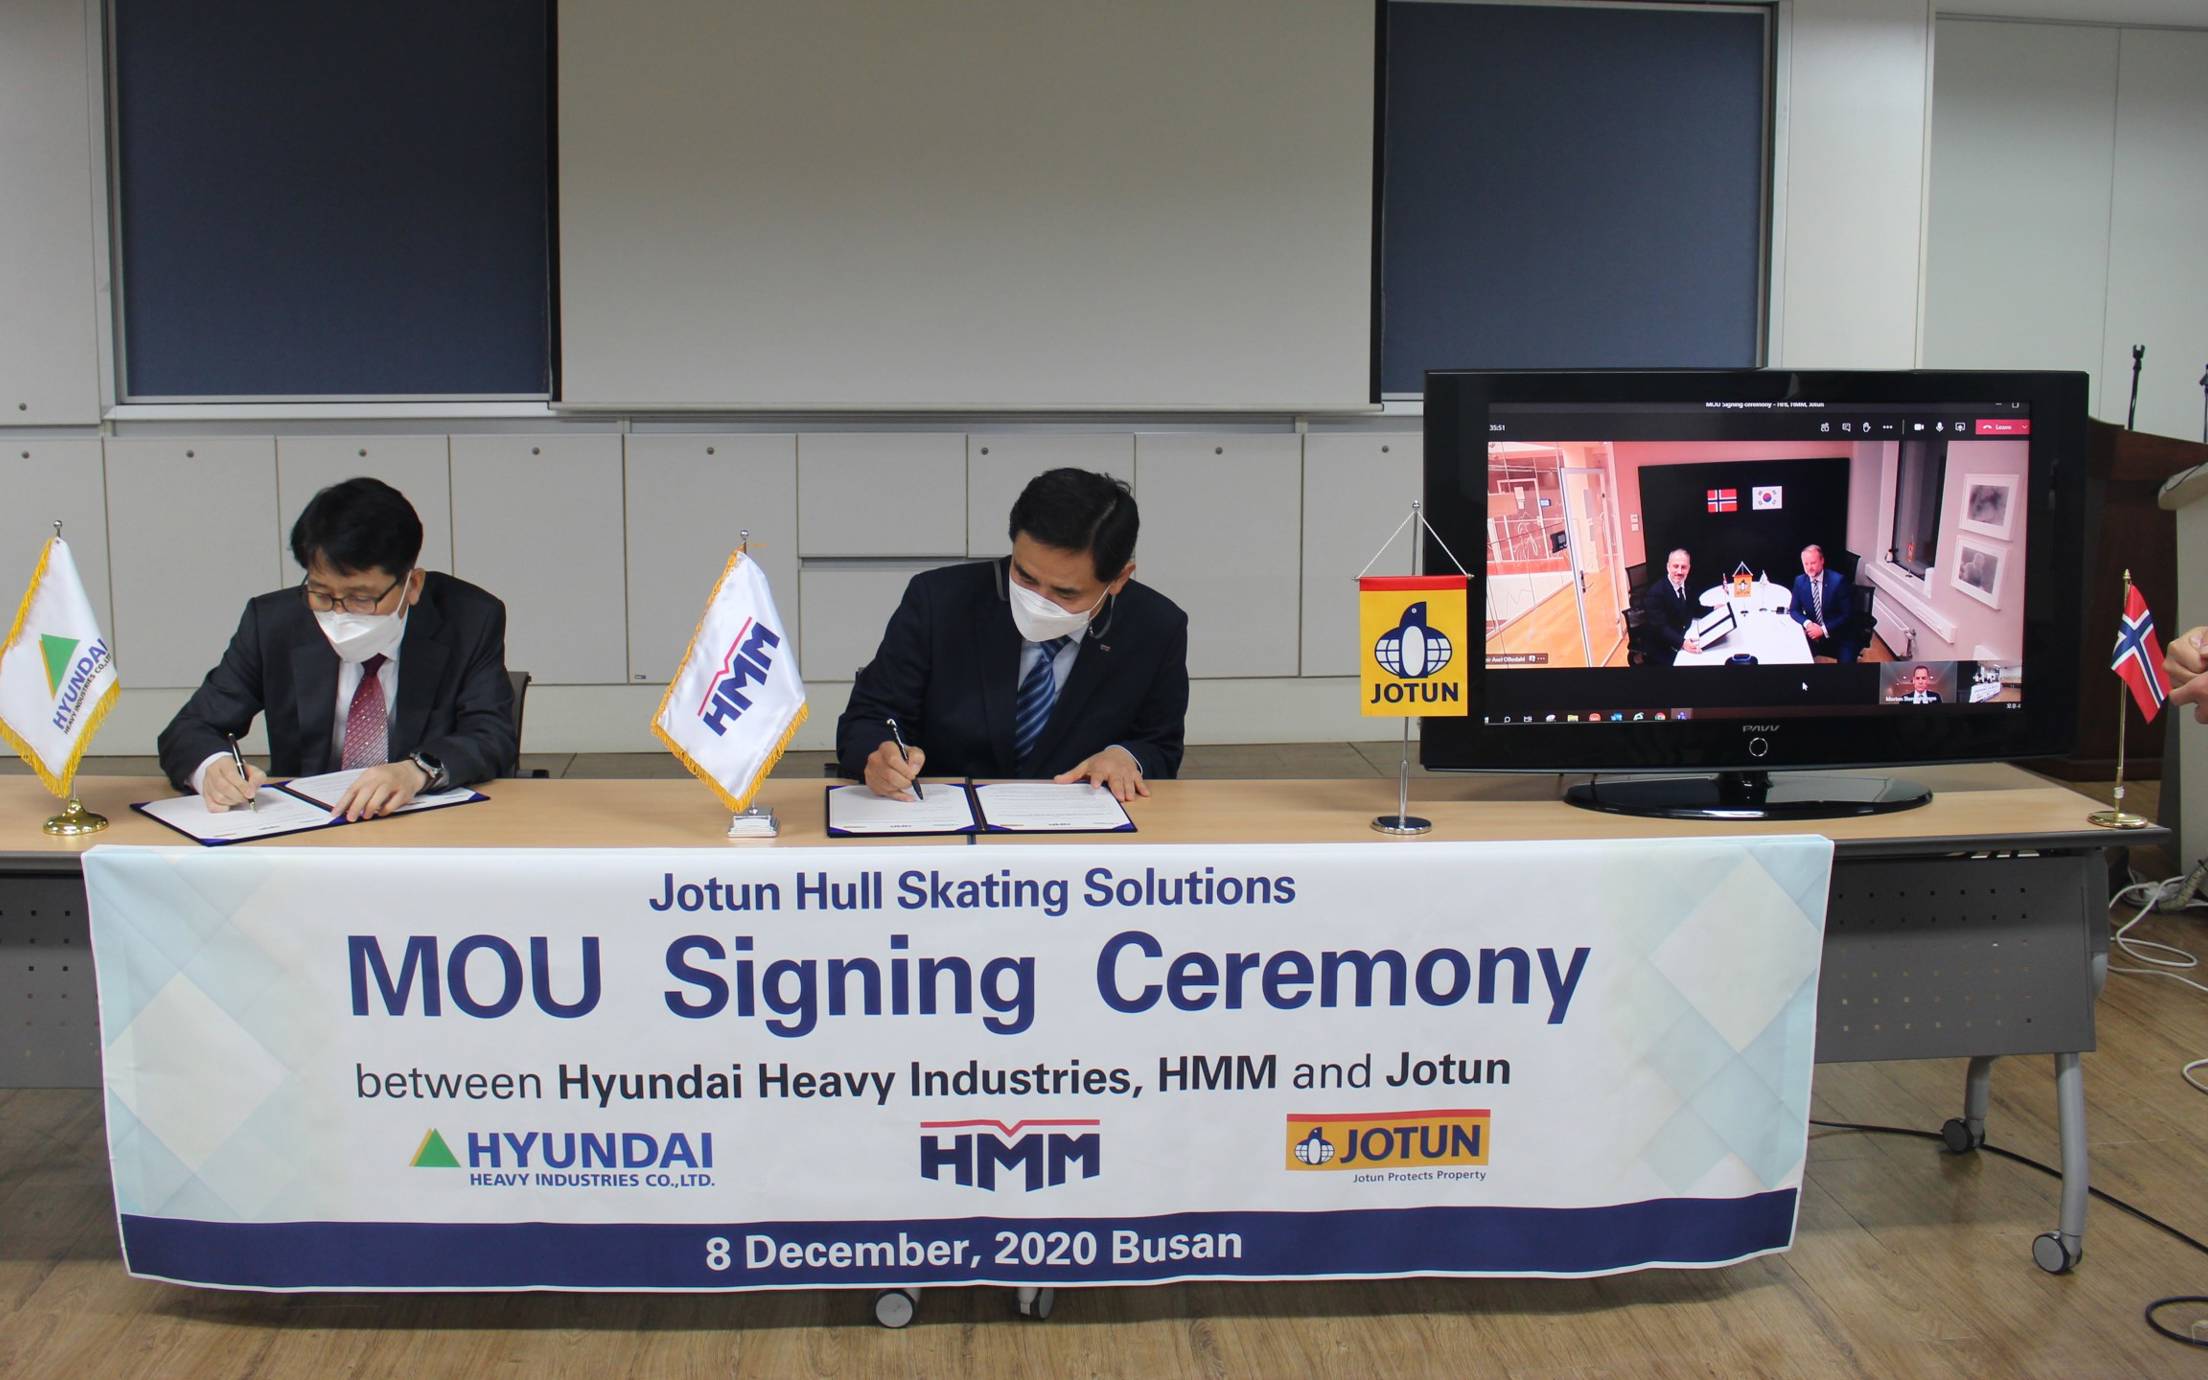 Jotun, HMM Co ltd and Hyundai Heavy Industries (HHI) signing ceremony